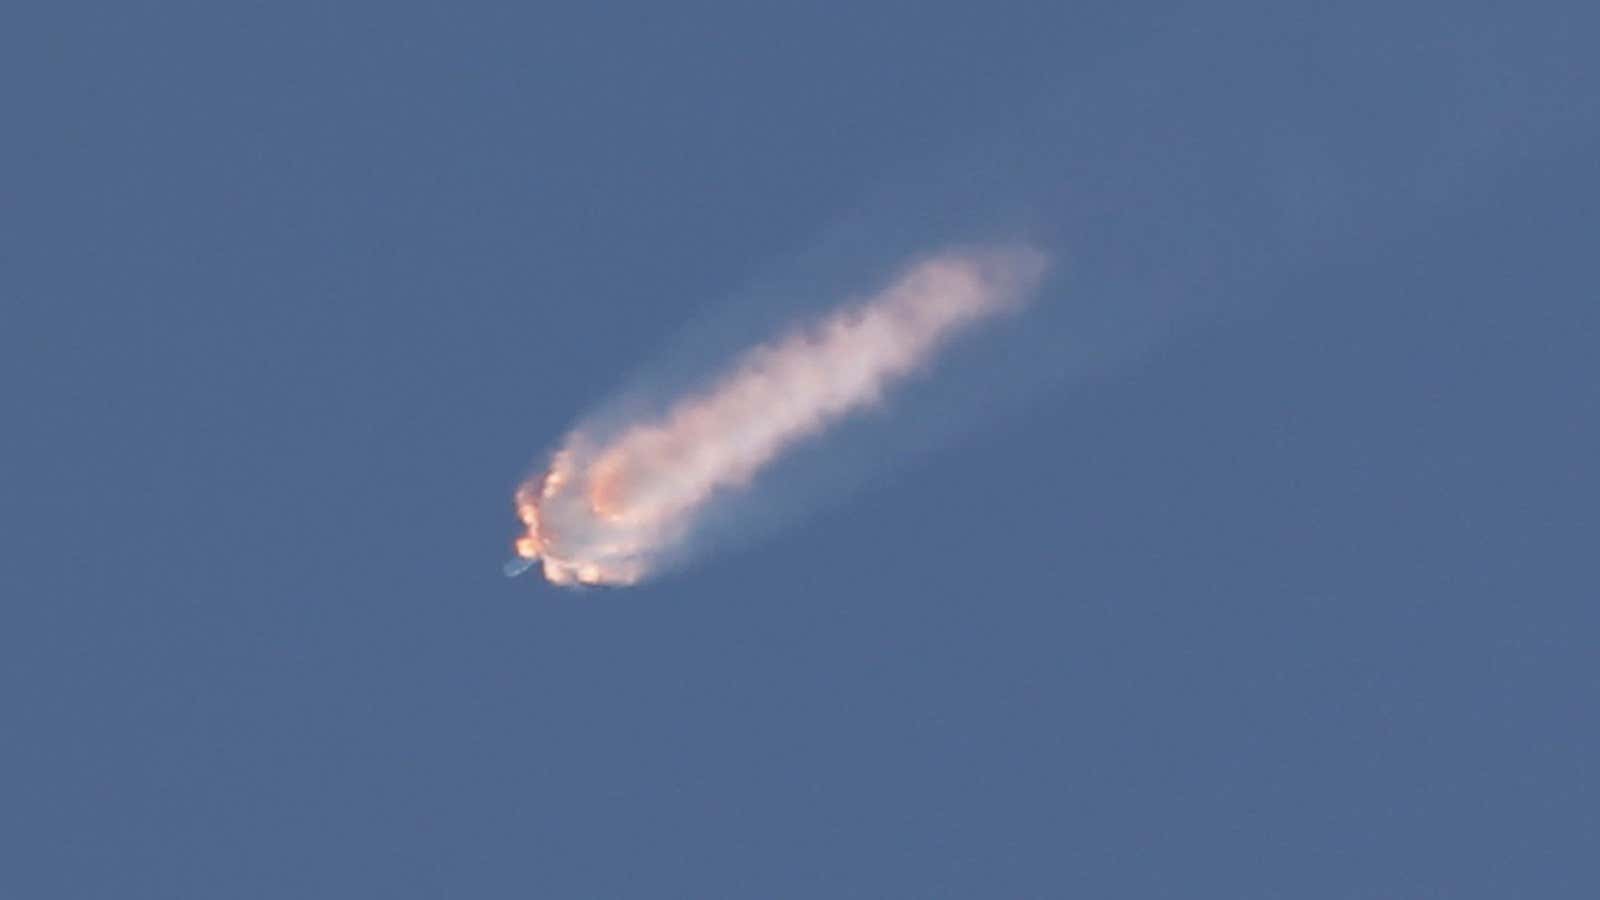 SpaceX’s Falcon 9 rocket and Dragon spacecraft breaks apart shortly after liftoff.